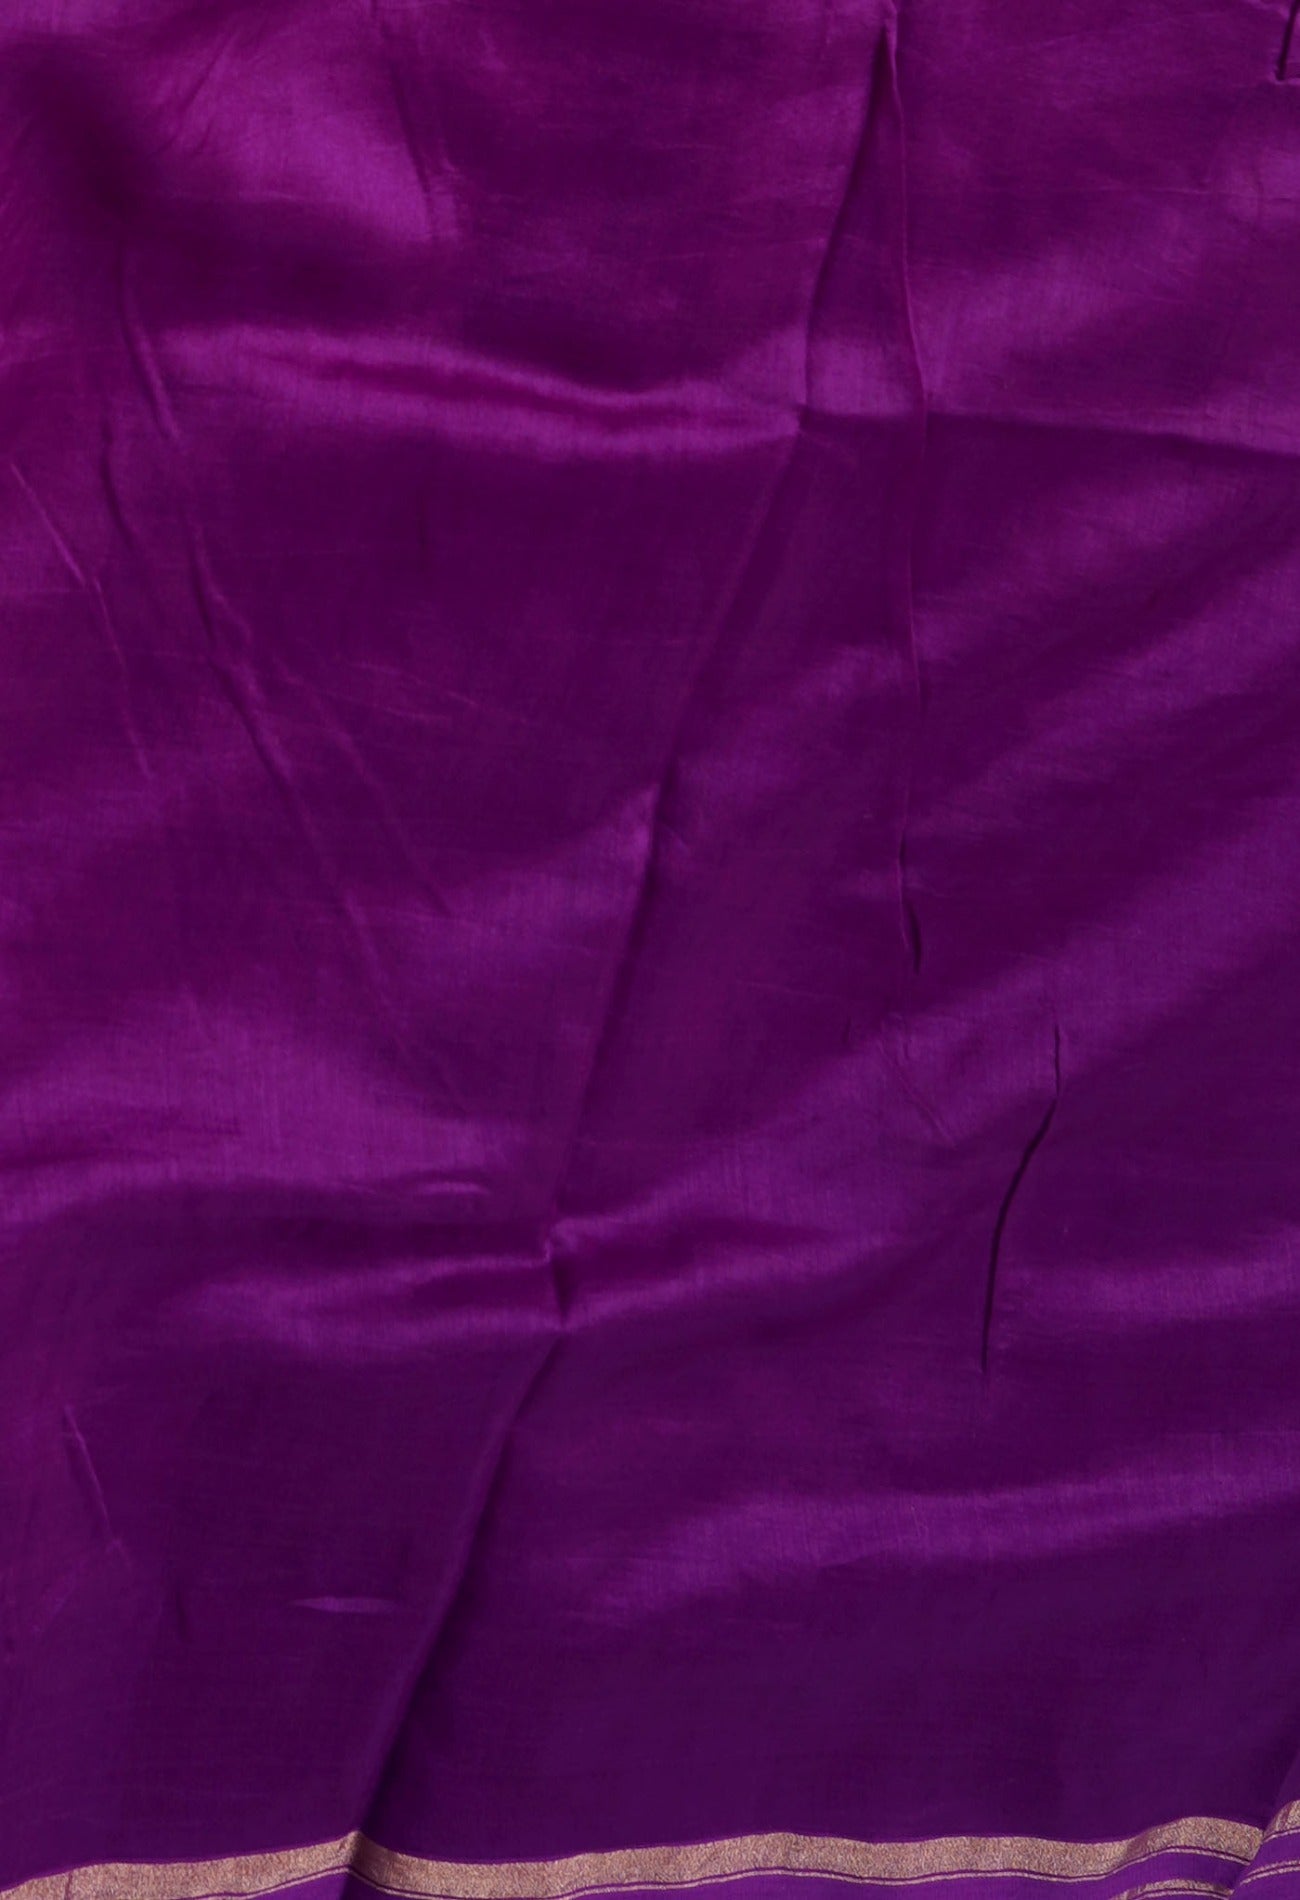 Online Shopping for Purple Pure Chanderi Sico Saree with Weaving from Madhya Pradesh at Unnatisilks.com India
